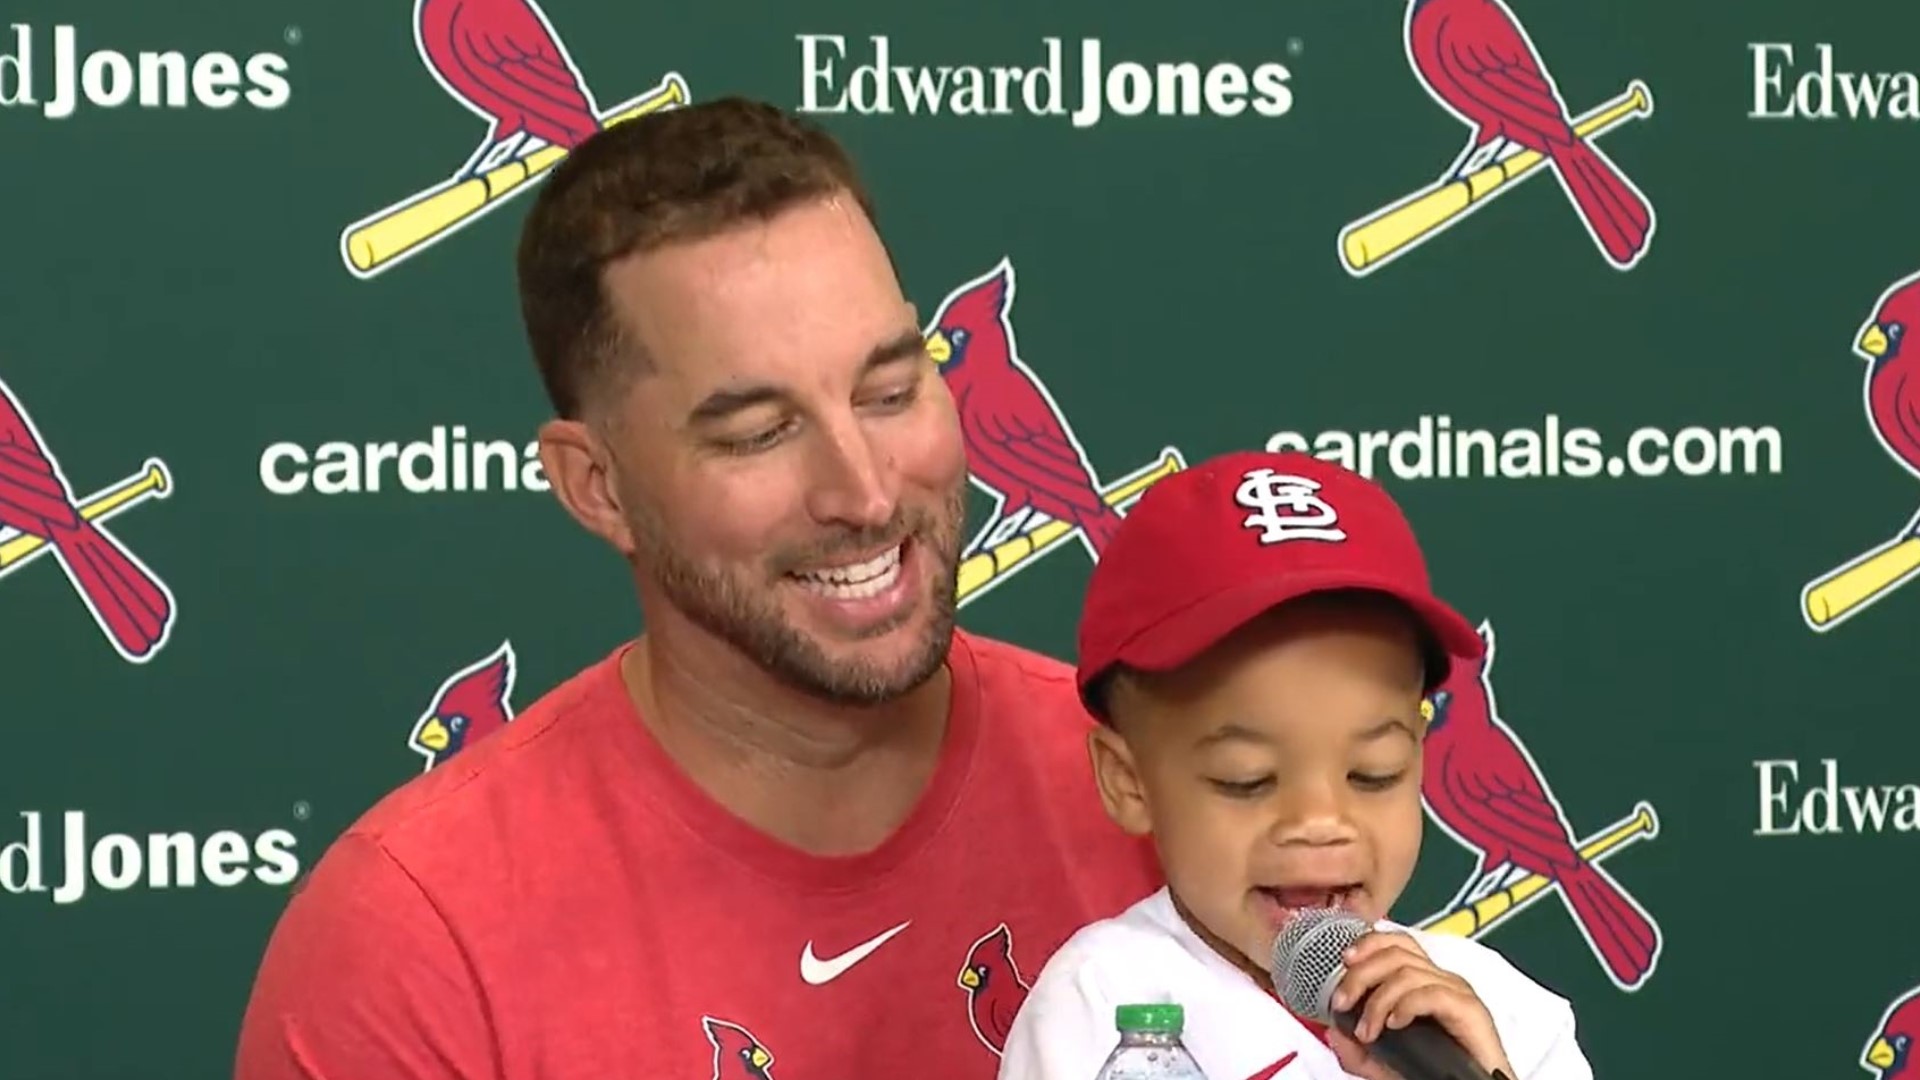 Adam Wainwright and his son Caleb sat down for a post-game interview following the Cardinals' win. Caleb ended up stealing the show.